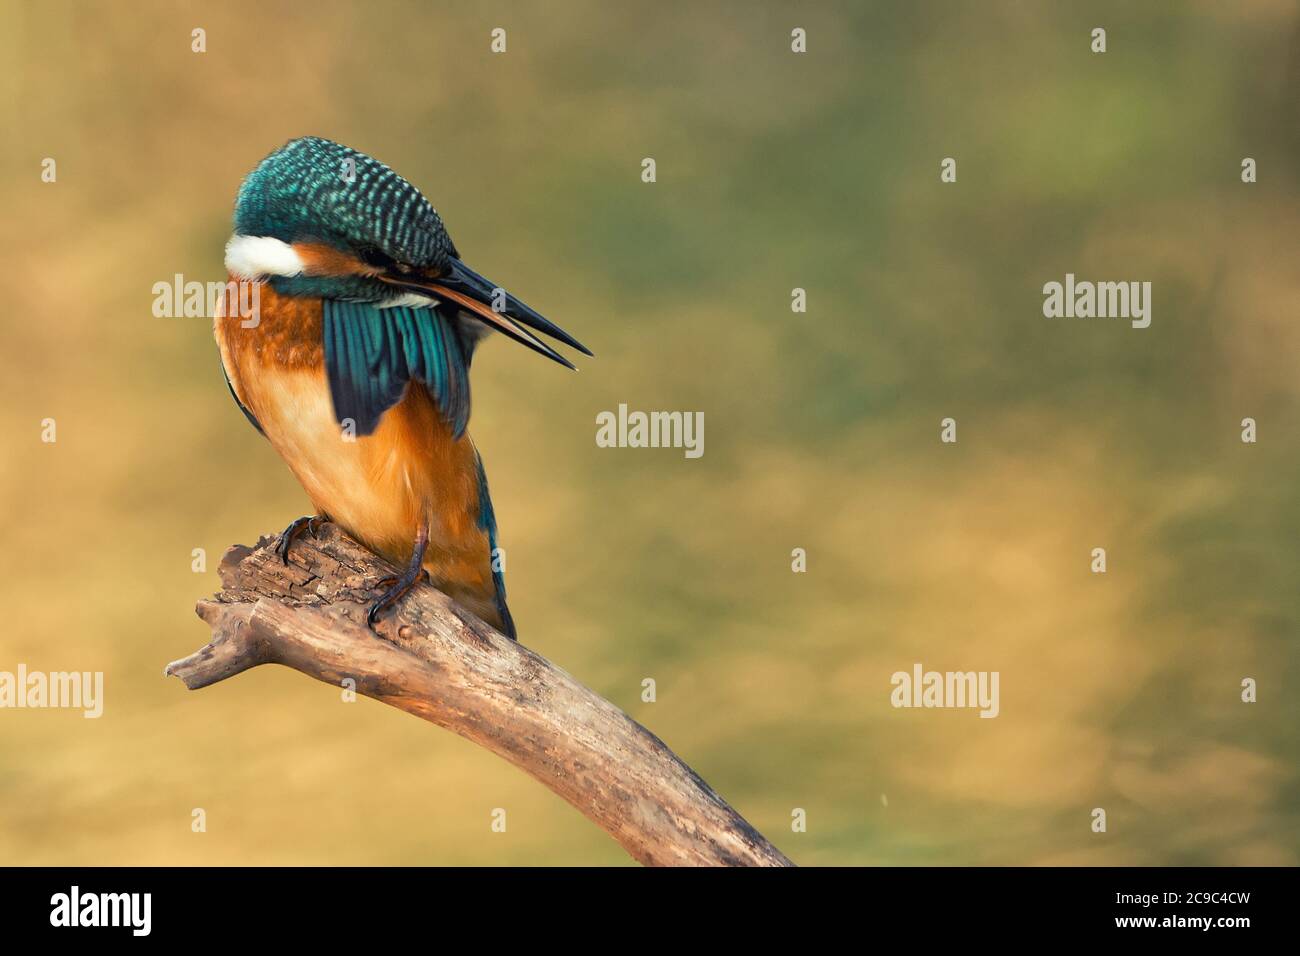 Common Kingfisher (Alcedo atthis) sits on a stick on a beautiful background, in a comic pose. Copy space. Stock Photo